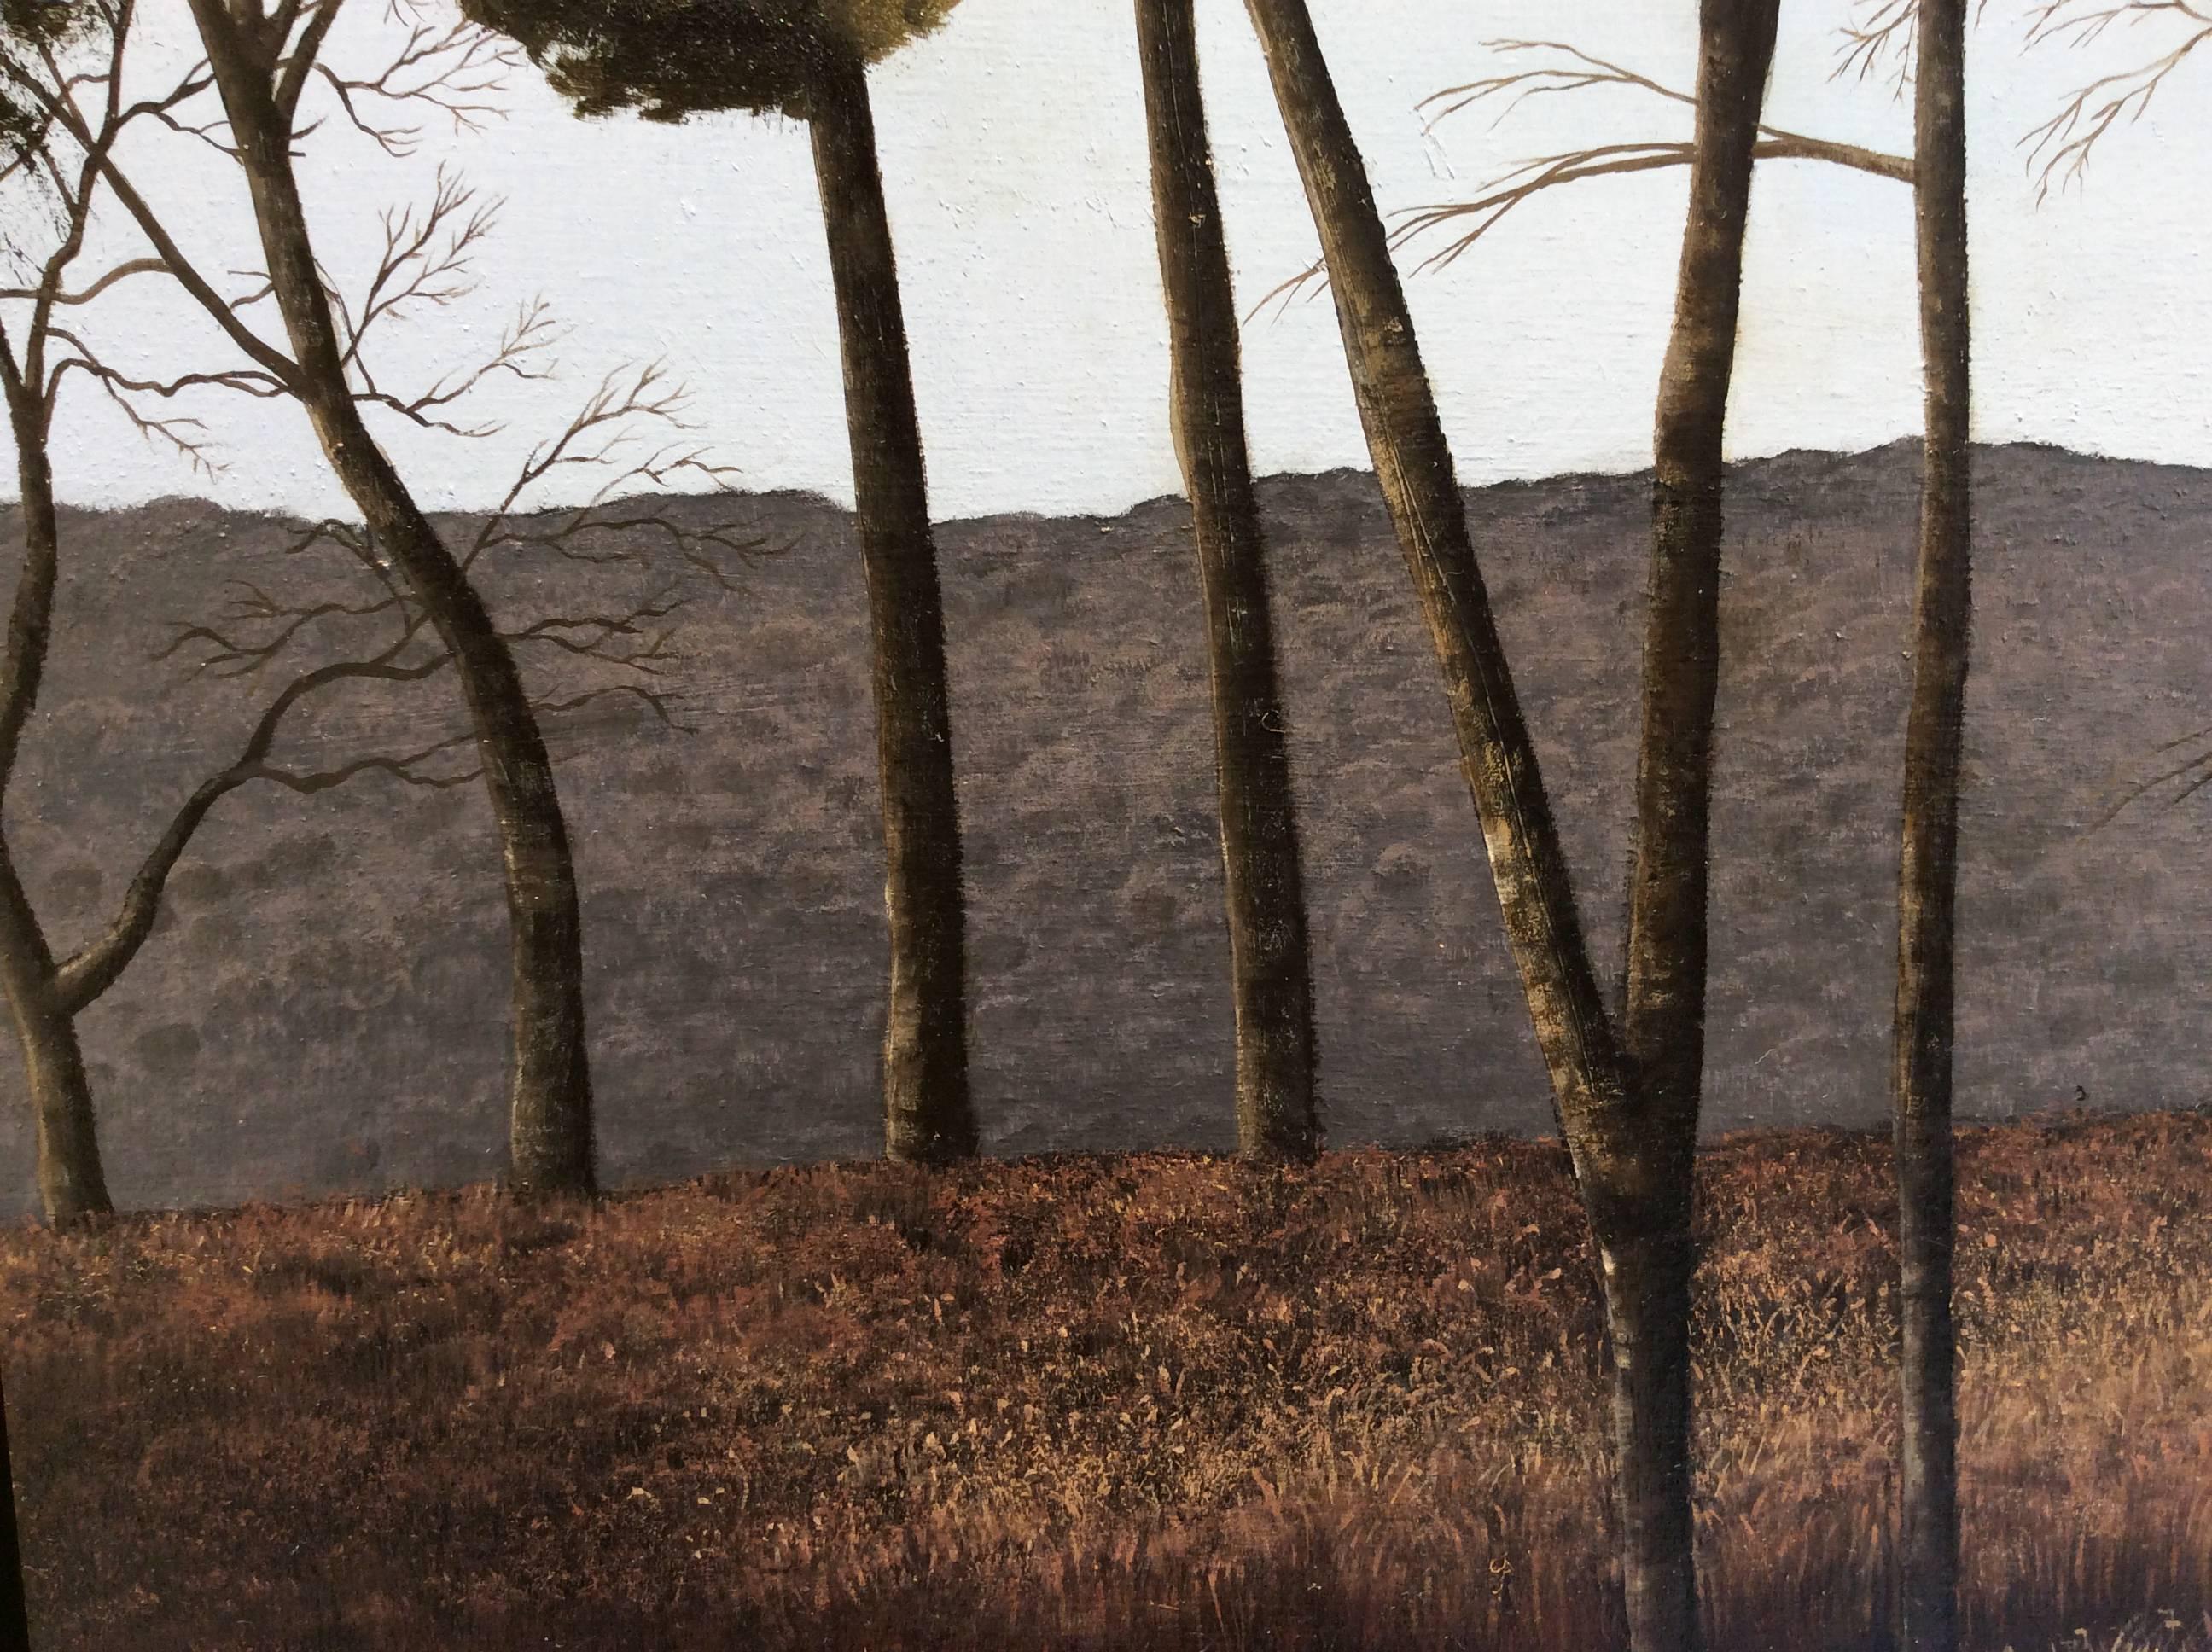 Stagger (Hyper Realist Late Autumn Landscape Painting on Wood Panel) 4